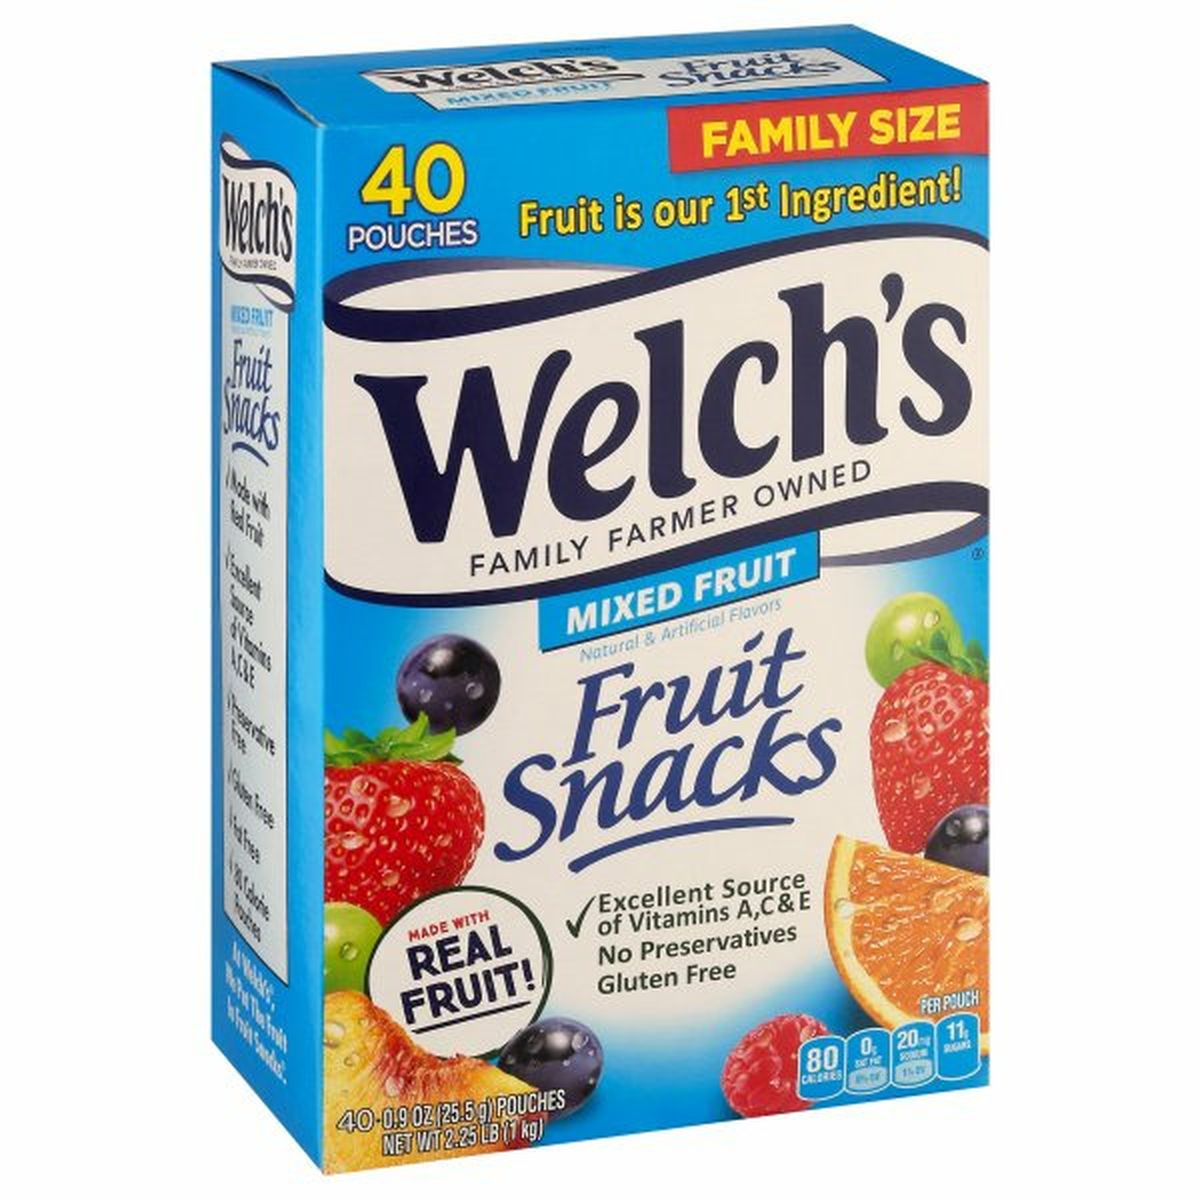 Calories in Welch's Fruit Snacks, Mixed Fruit, Family Size